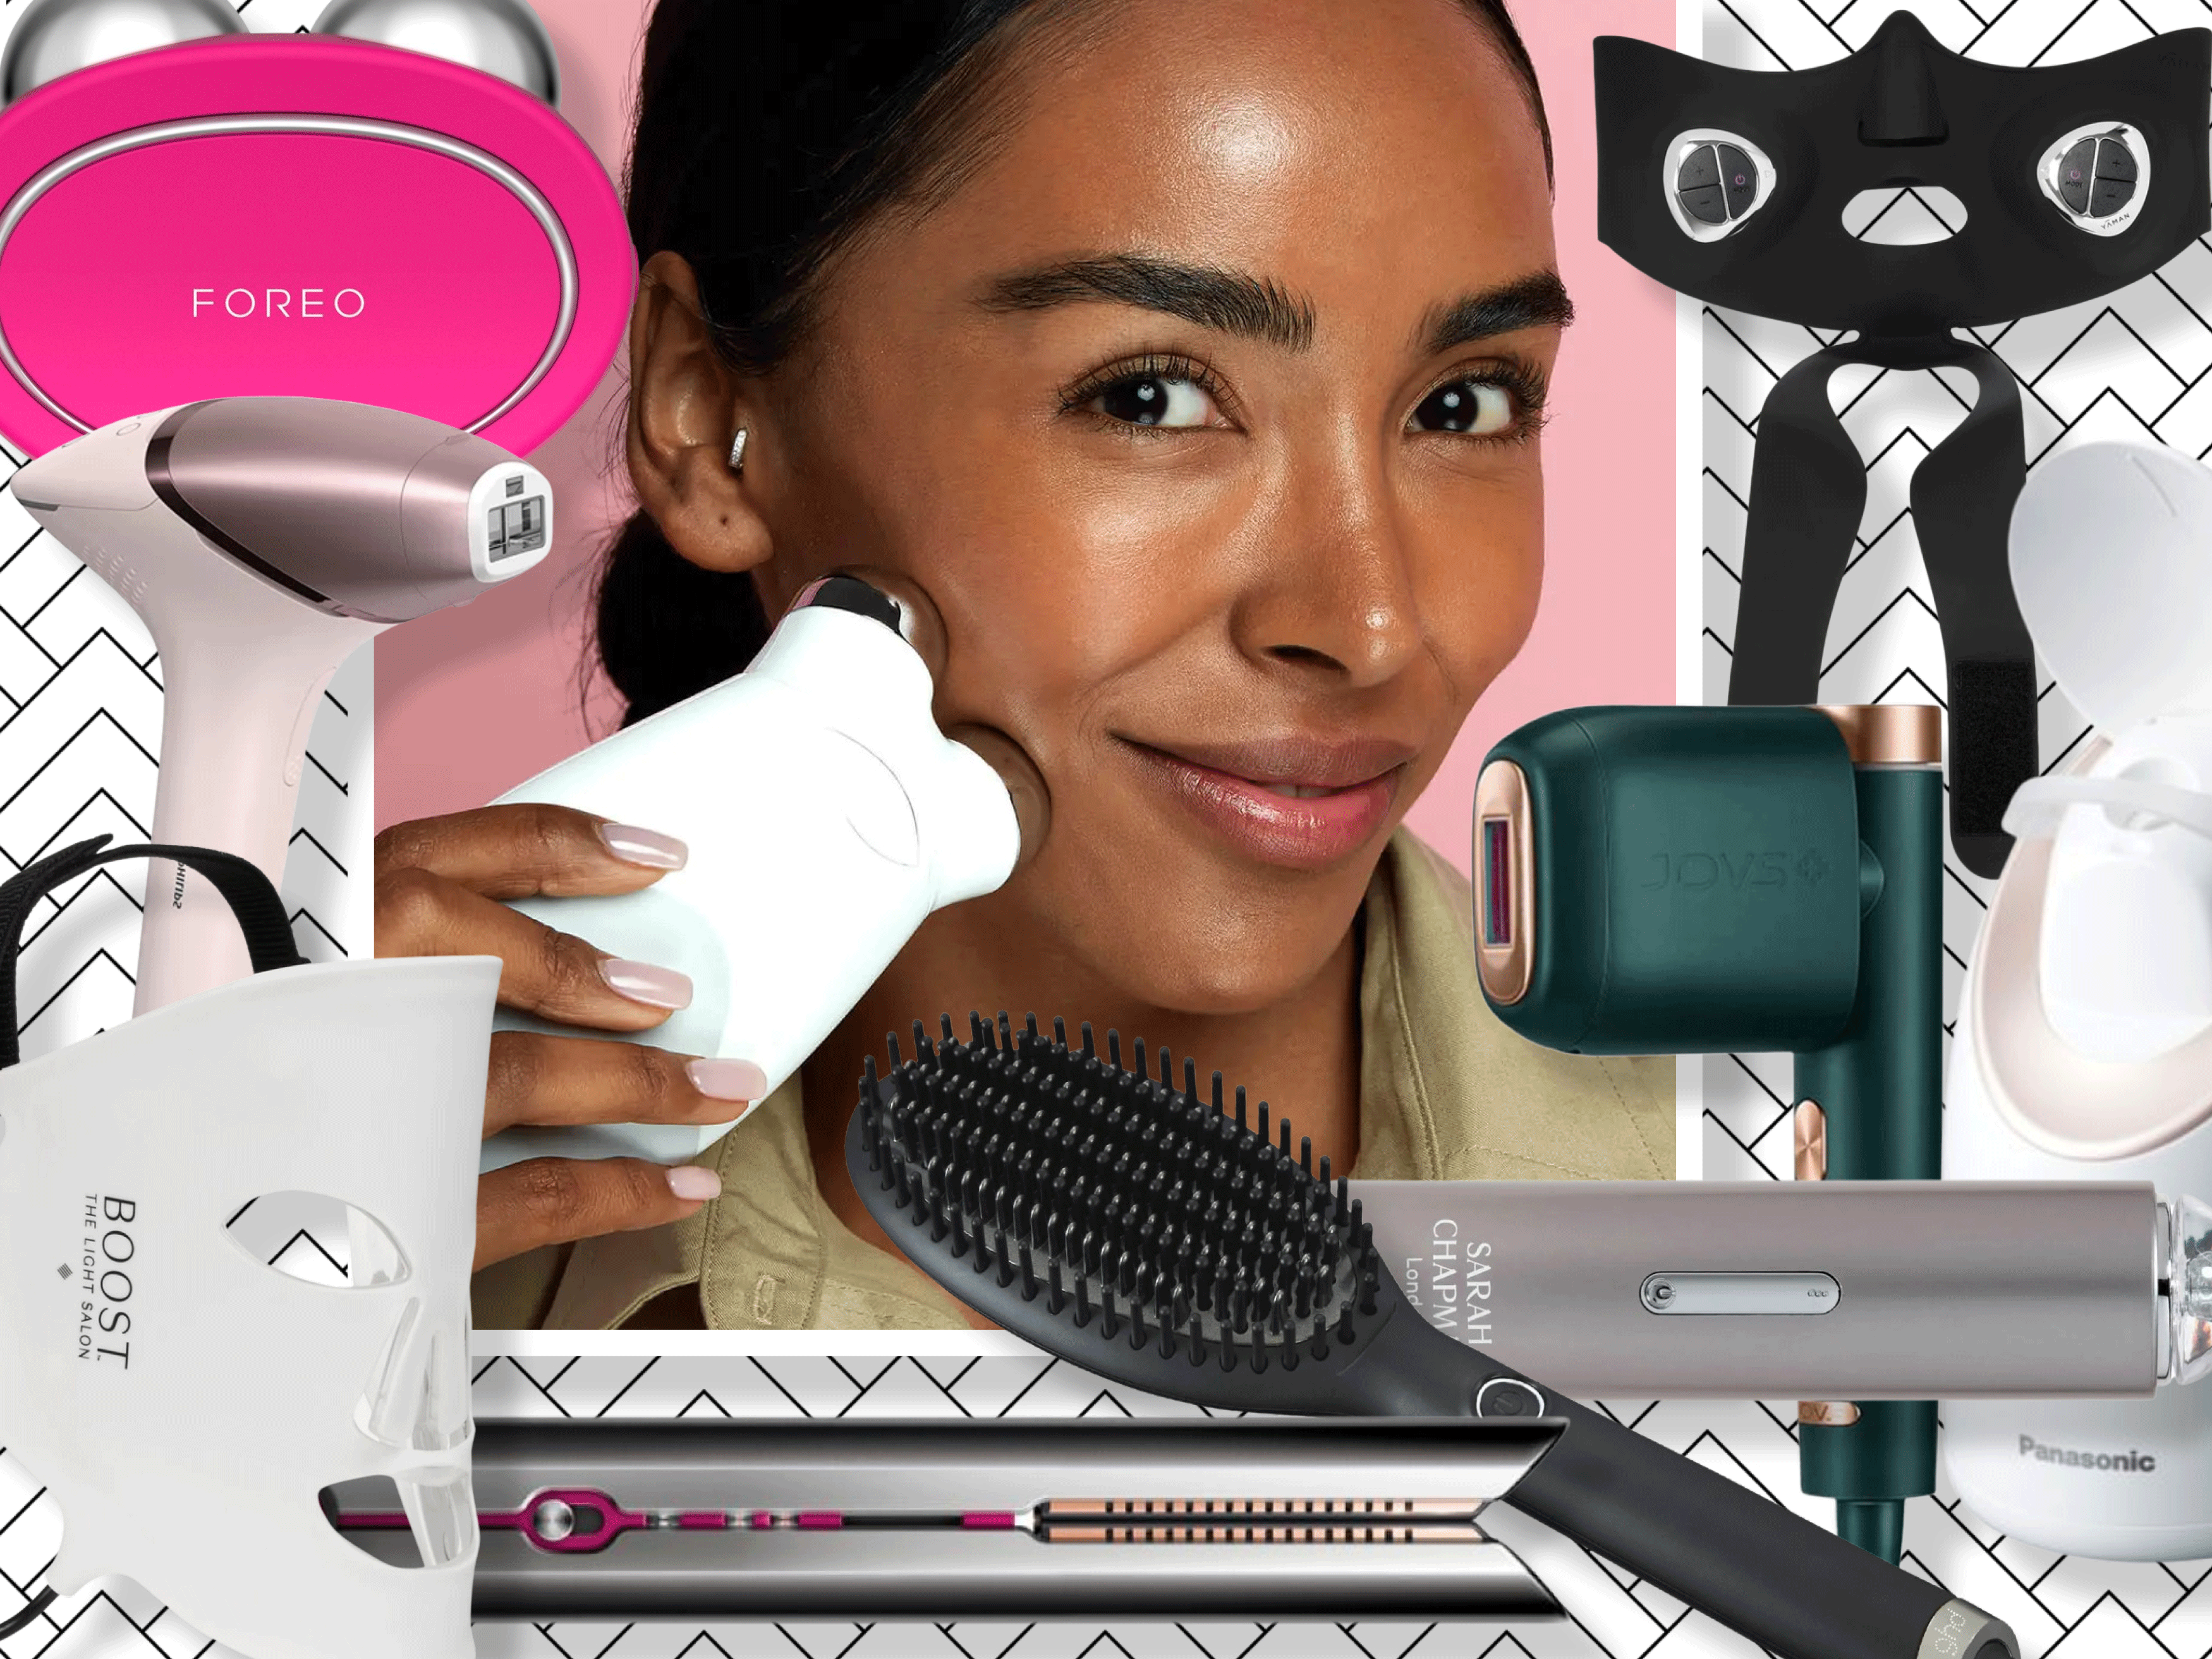 The best beauty gadgets and tools for hair, skin and body